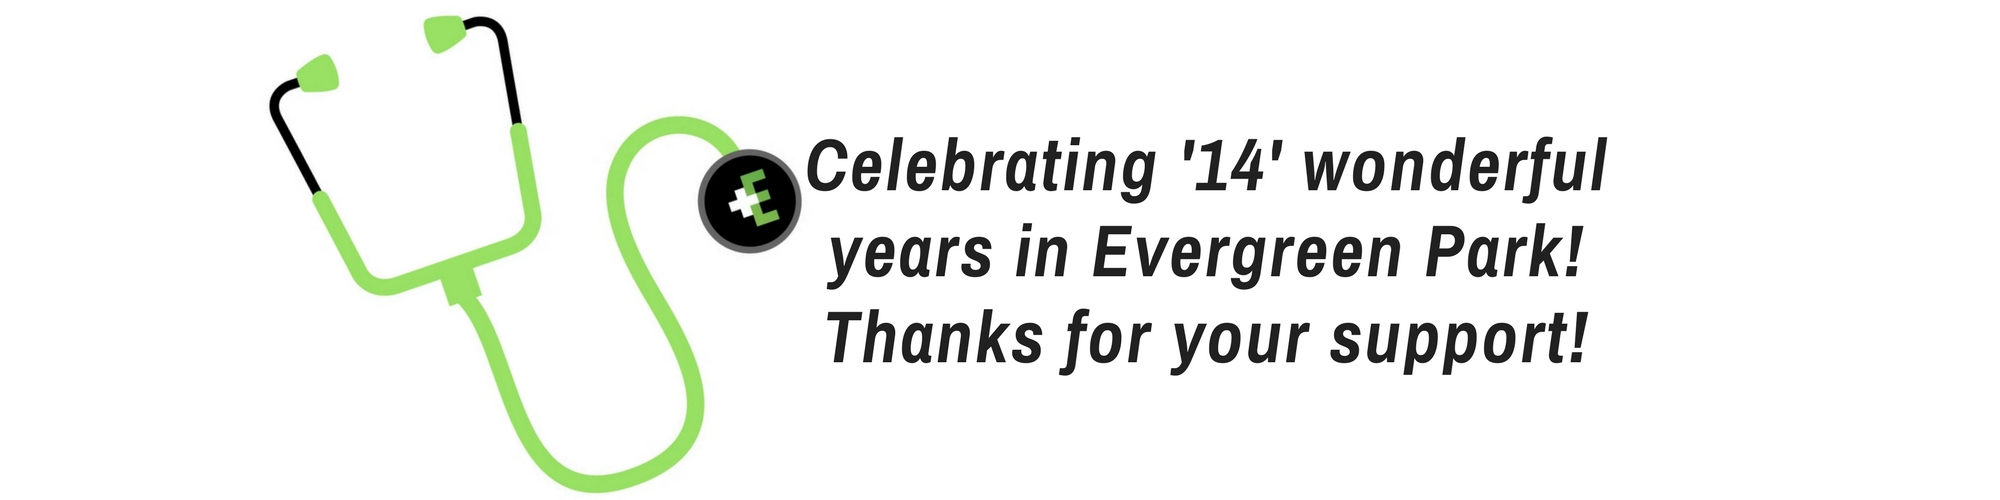 Celebrating 14 years in Evergreen Park